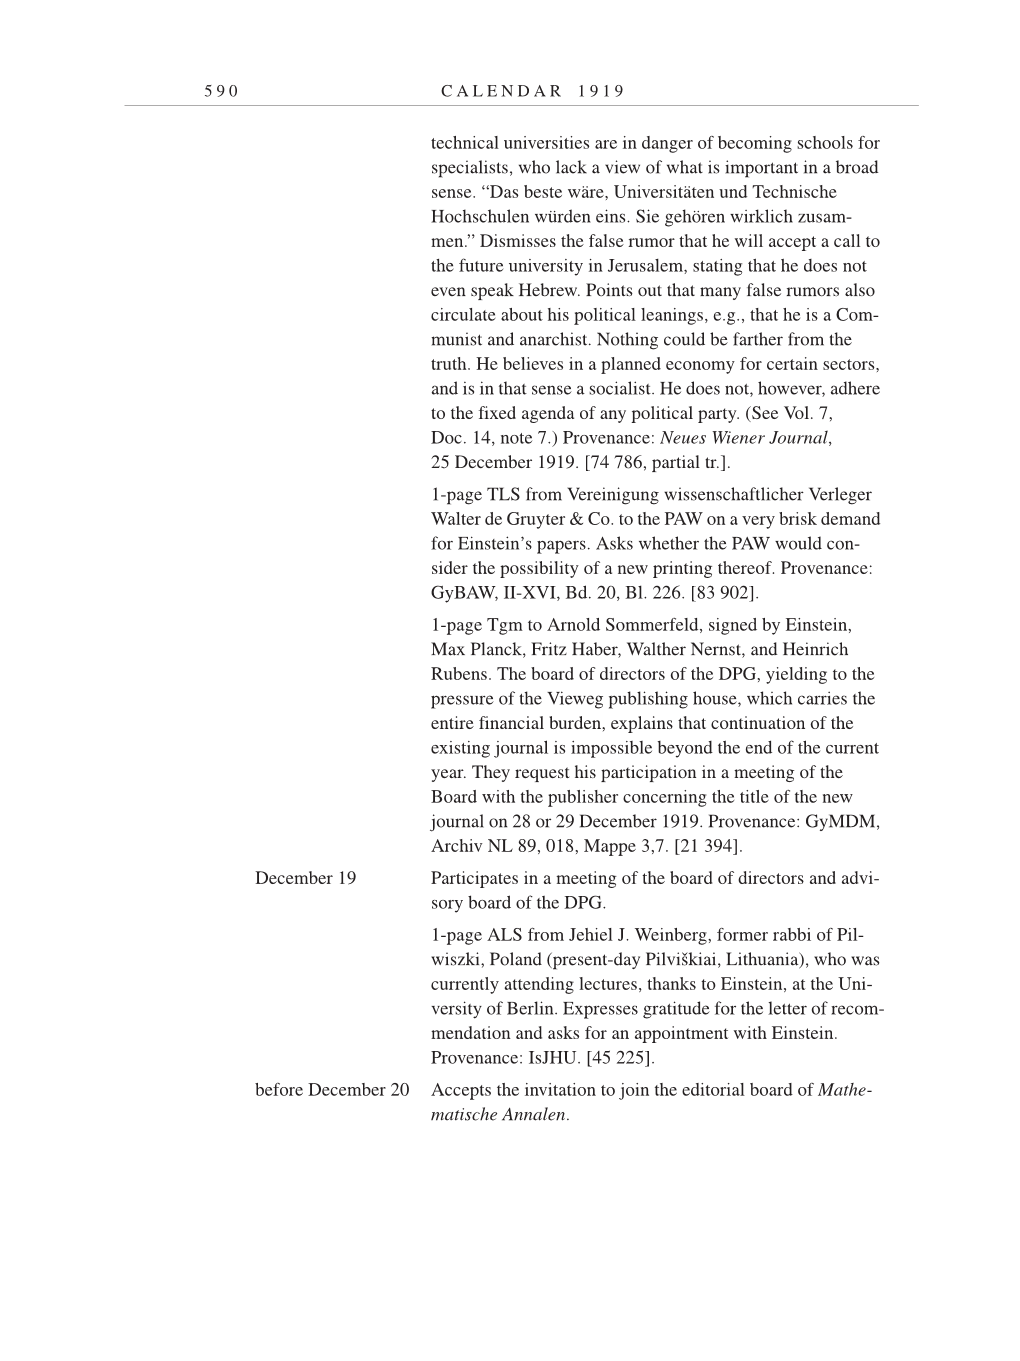 Volume 9: The Berlin Years: Correspondence January 1919-April 1920 page 590